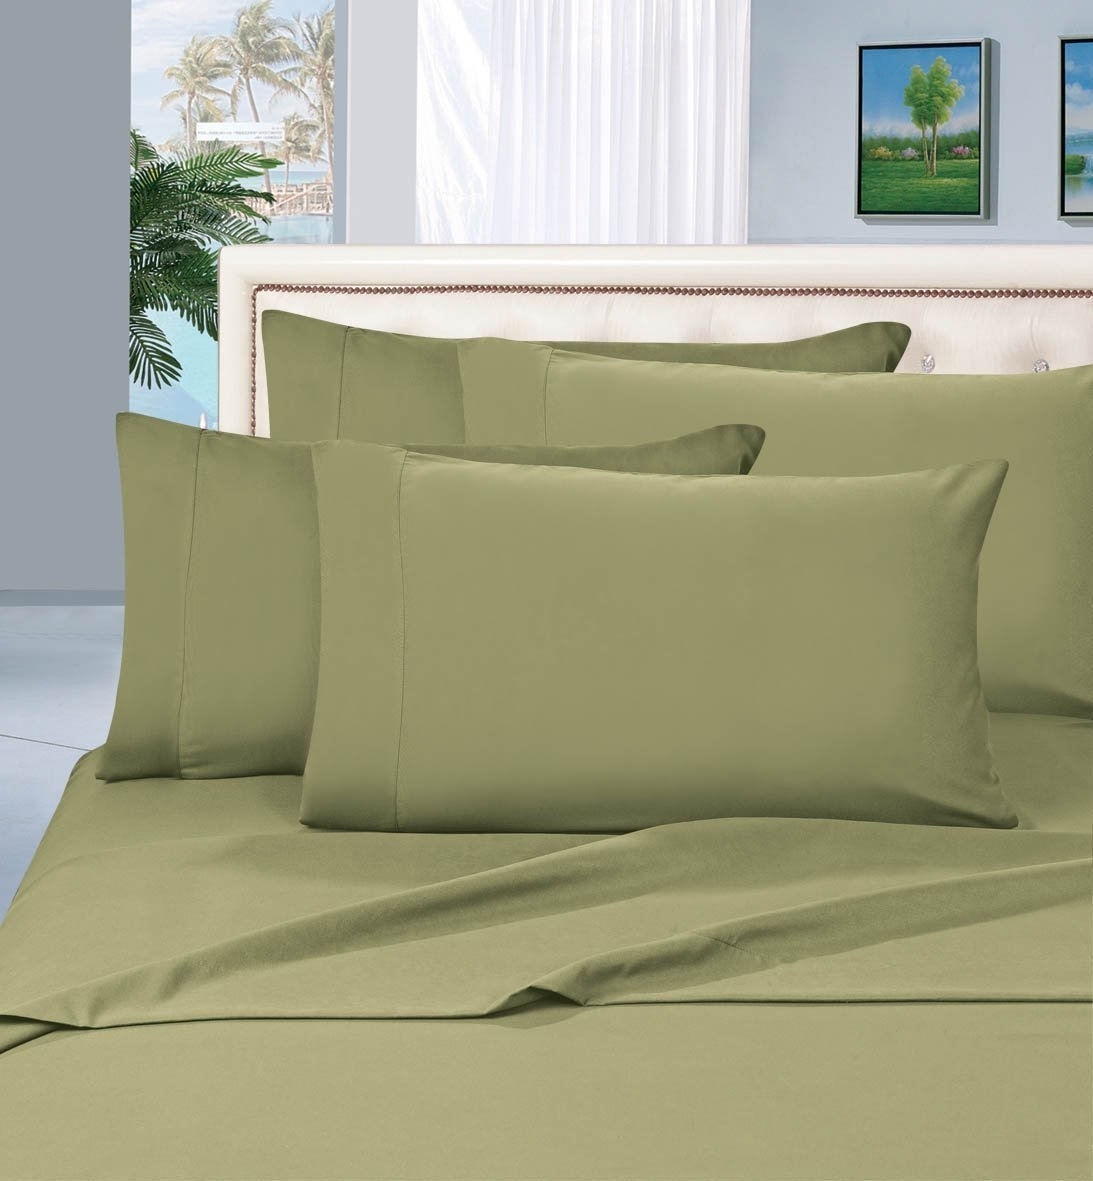 Elegant Comfort 1500 Series Wrinkle Resistant Egyptian Quality Hypoallergenic Ultra Soft Luxury 4-piece Bed Sheet Set, King, Sage-green